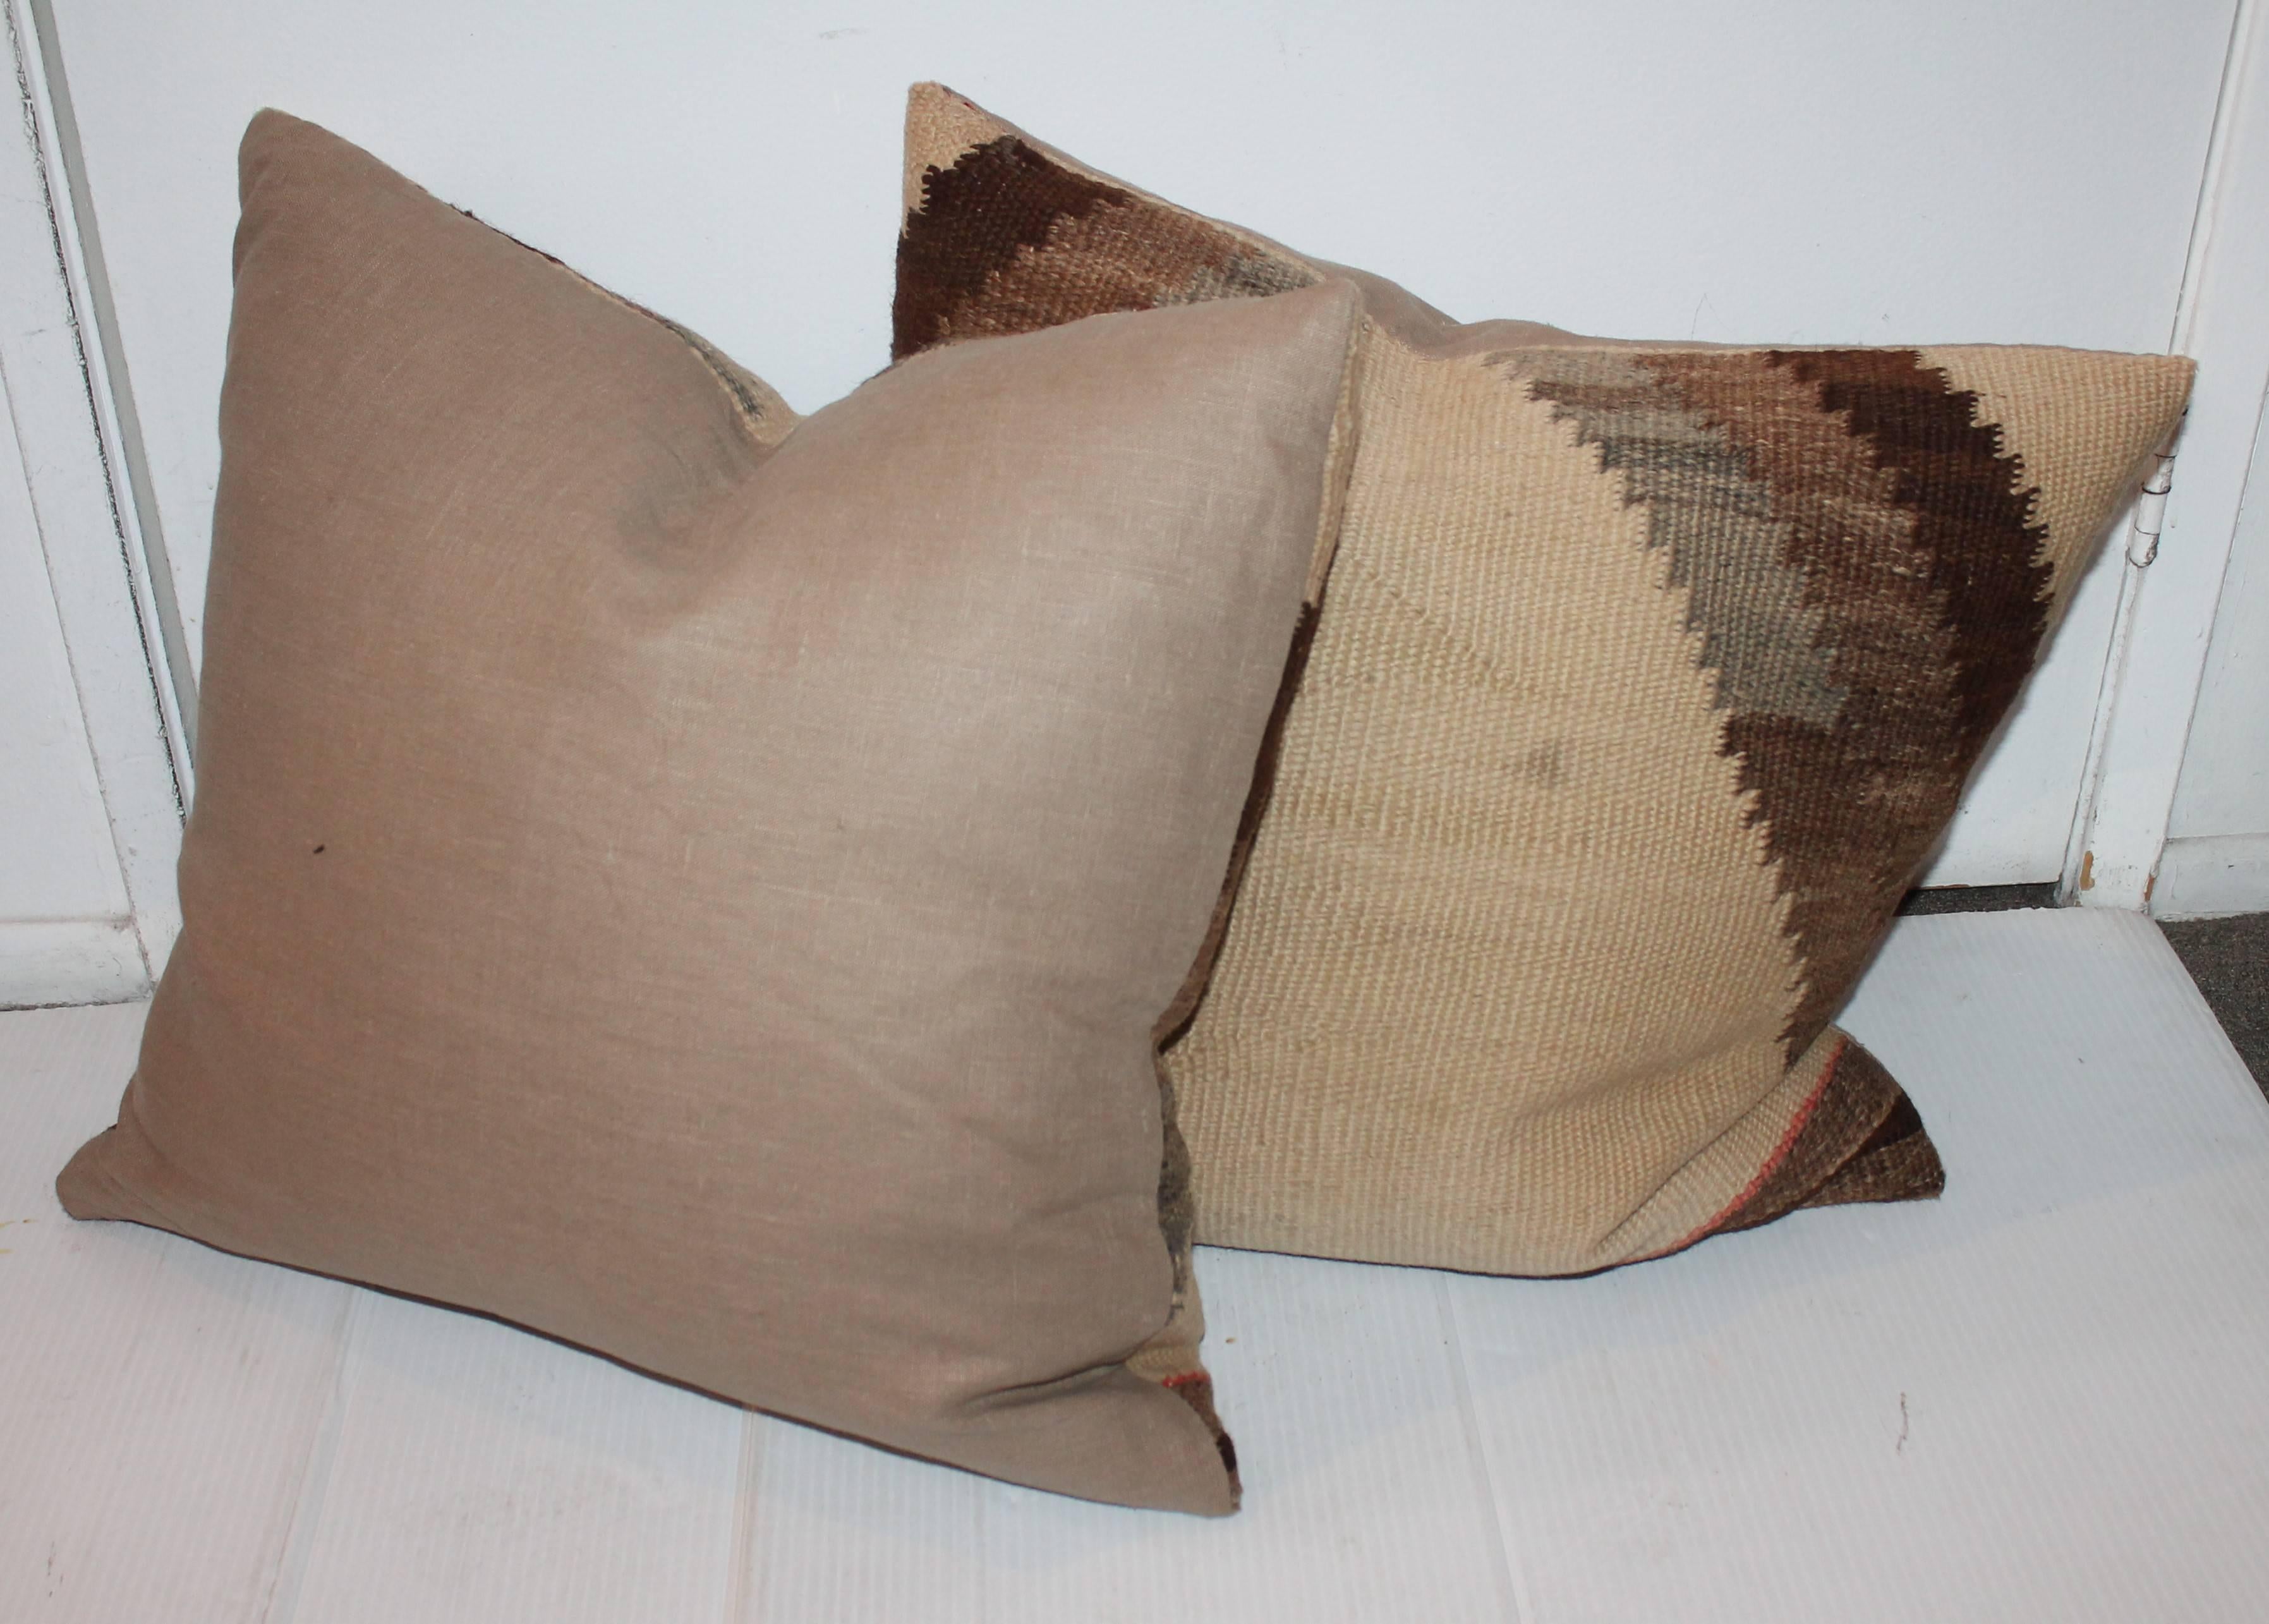 American Pair of Early 19th Century Brown and Tan Navajo Weaving Pillows For Sale